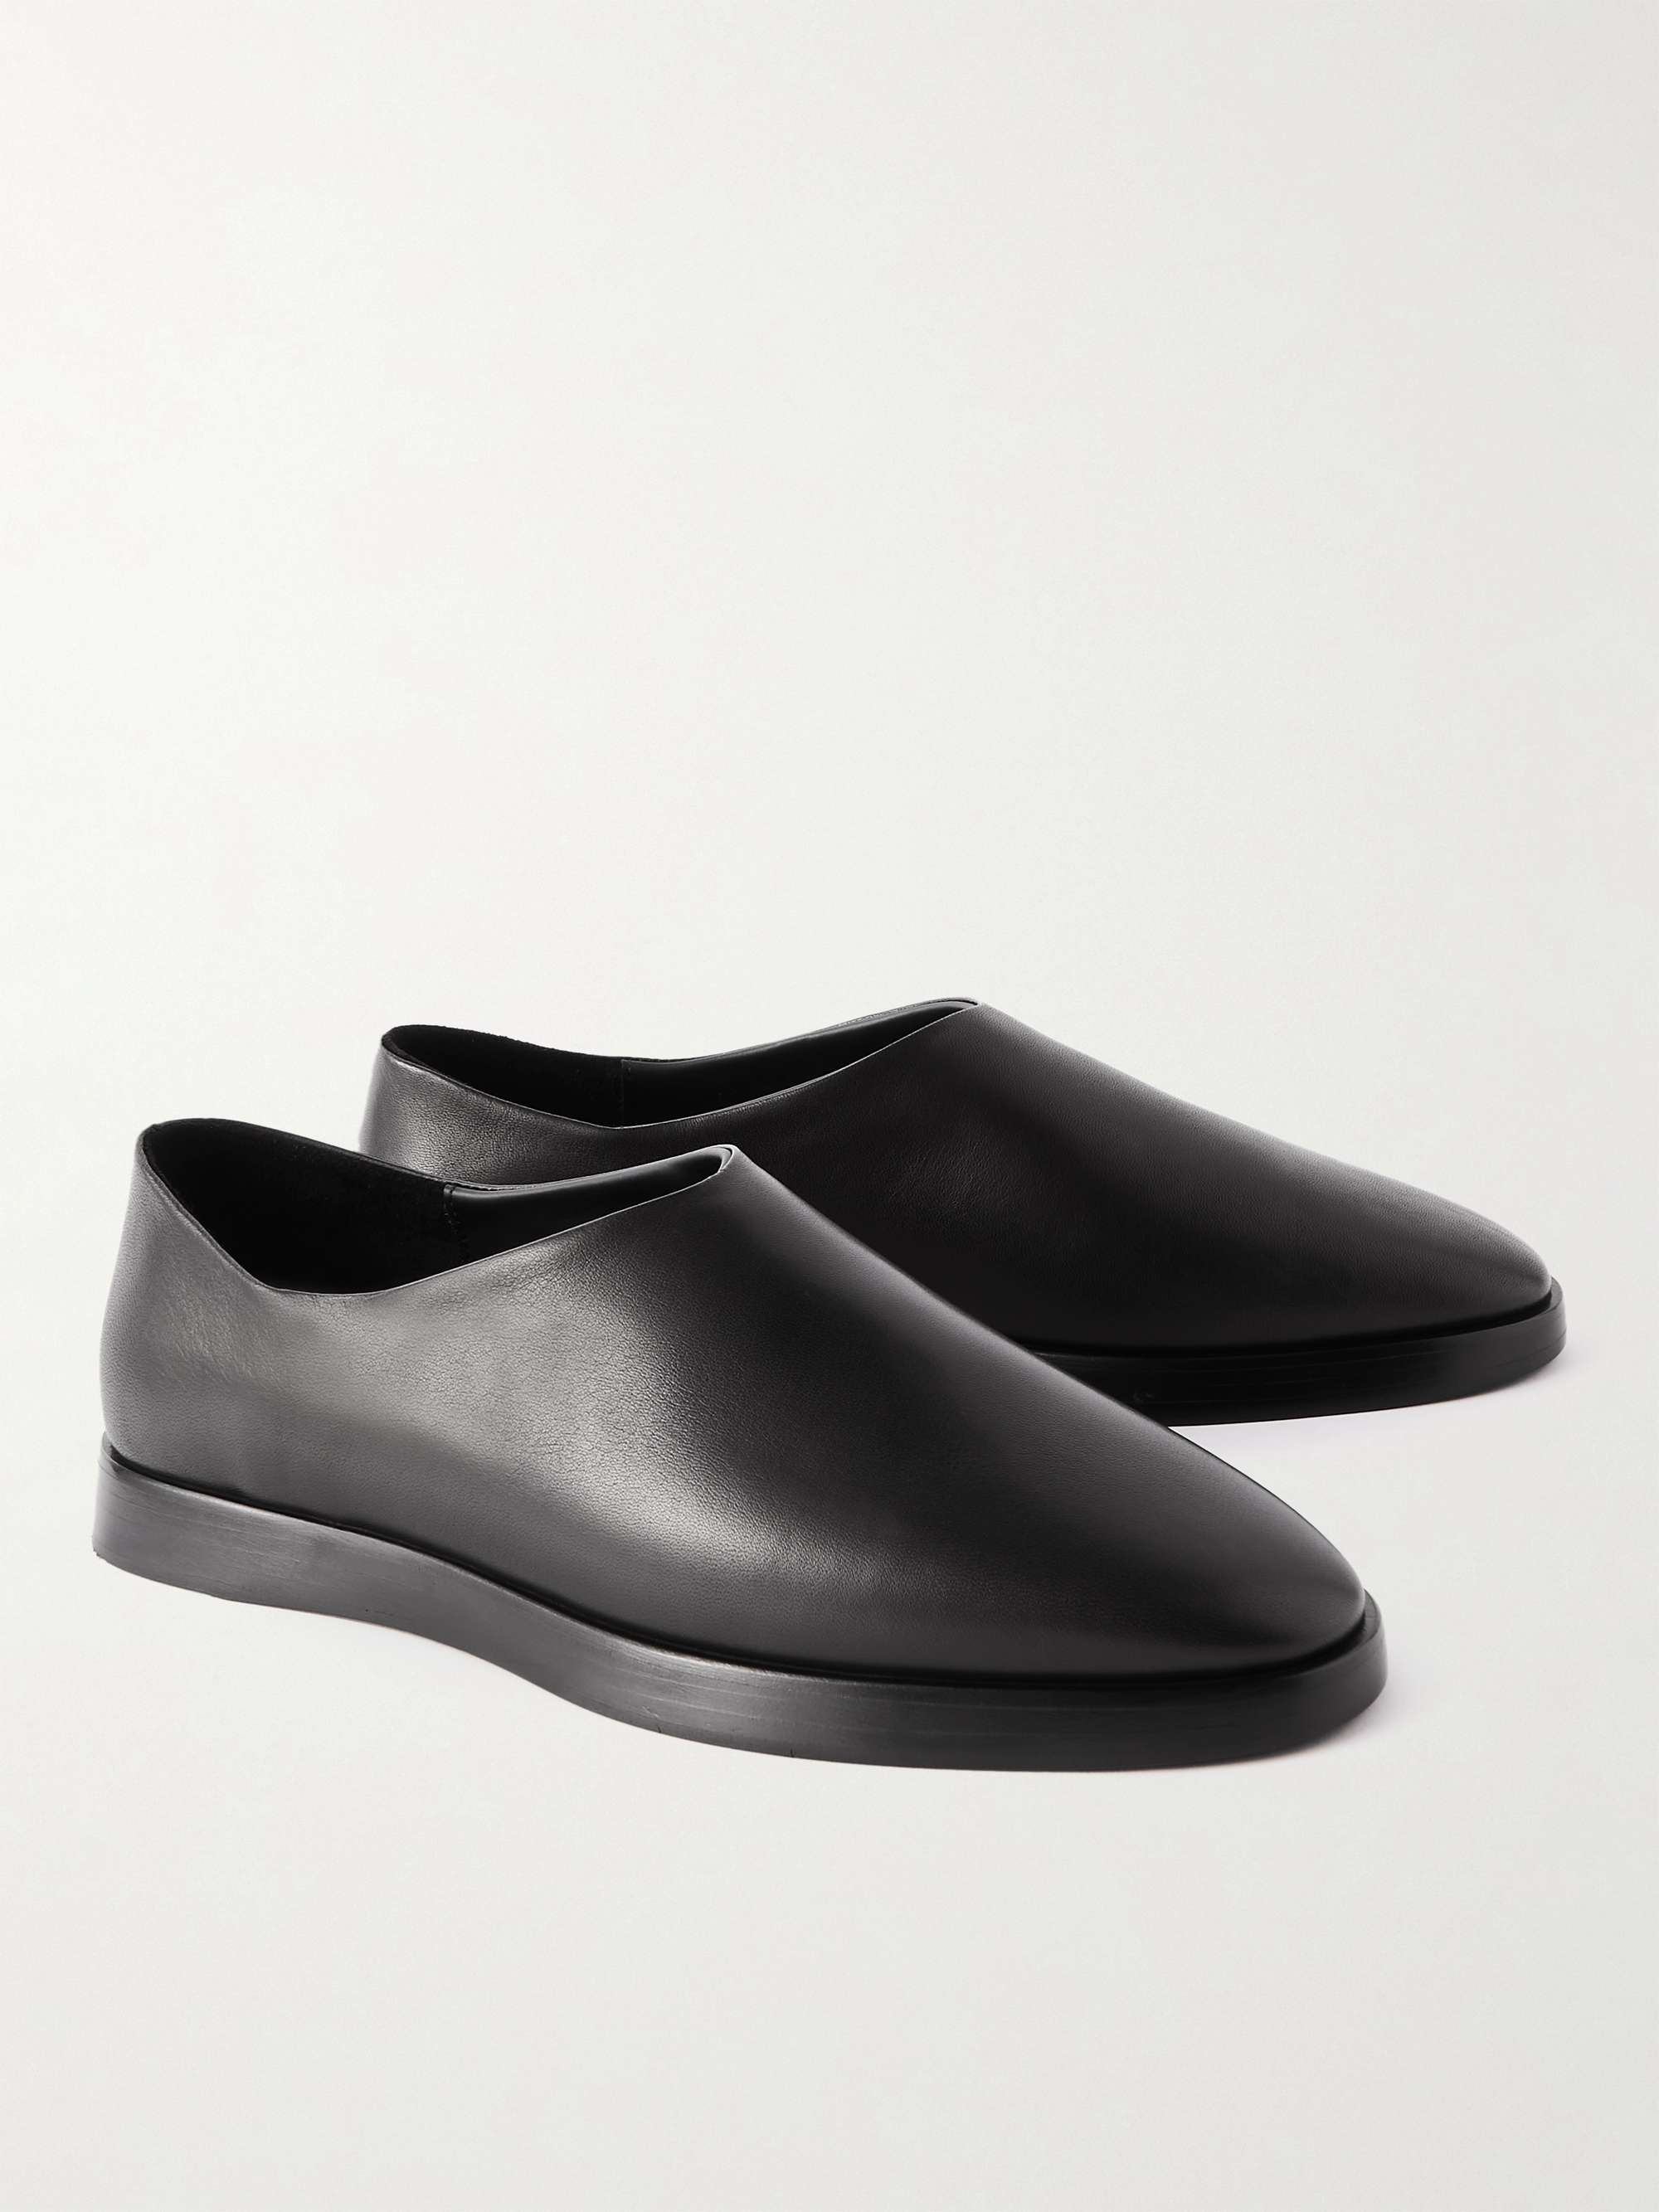 FEAR OF GOD Eternal Collapsible-Heel Leather Loafers